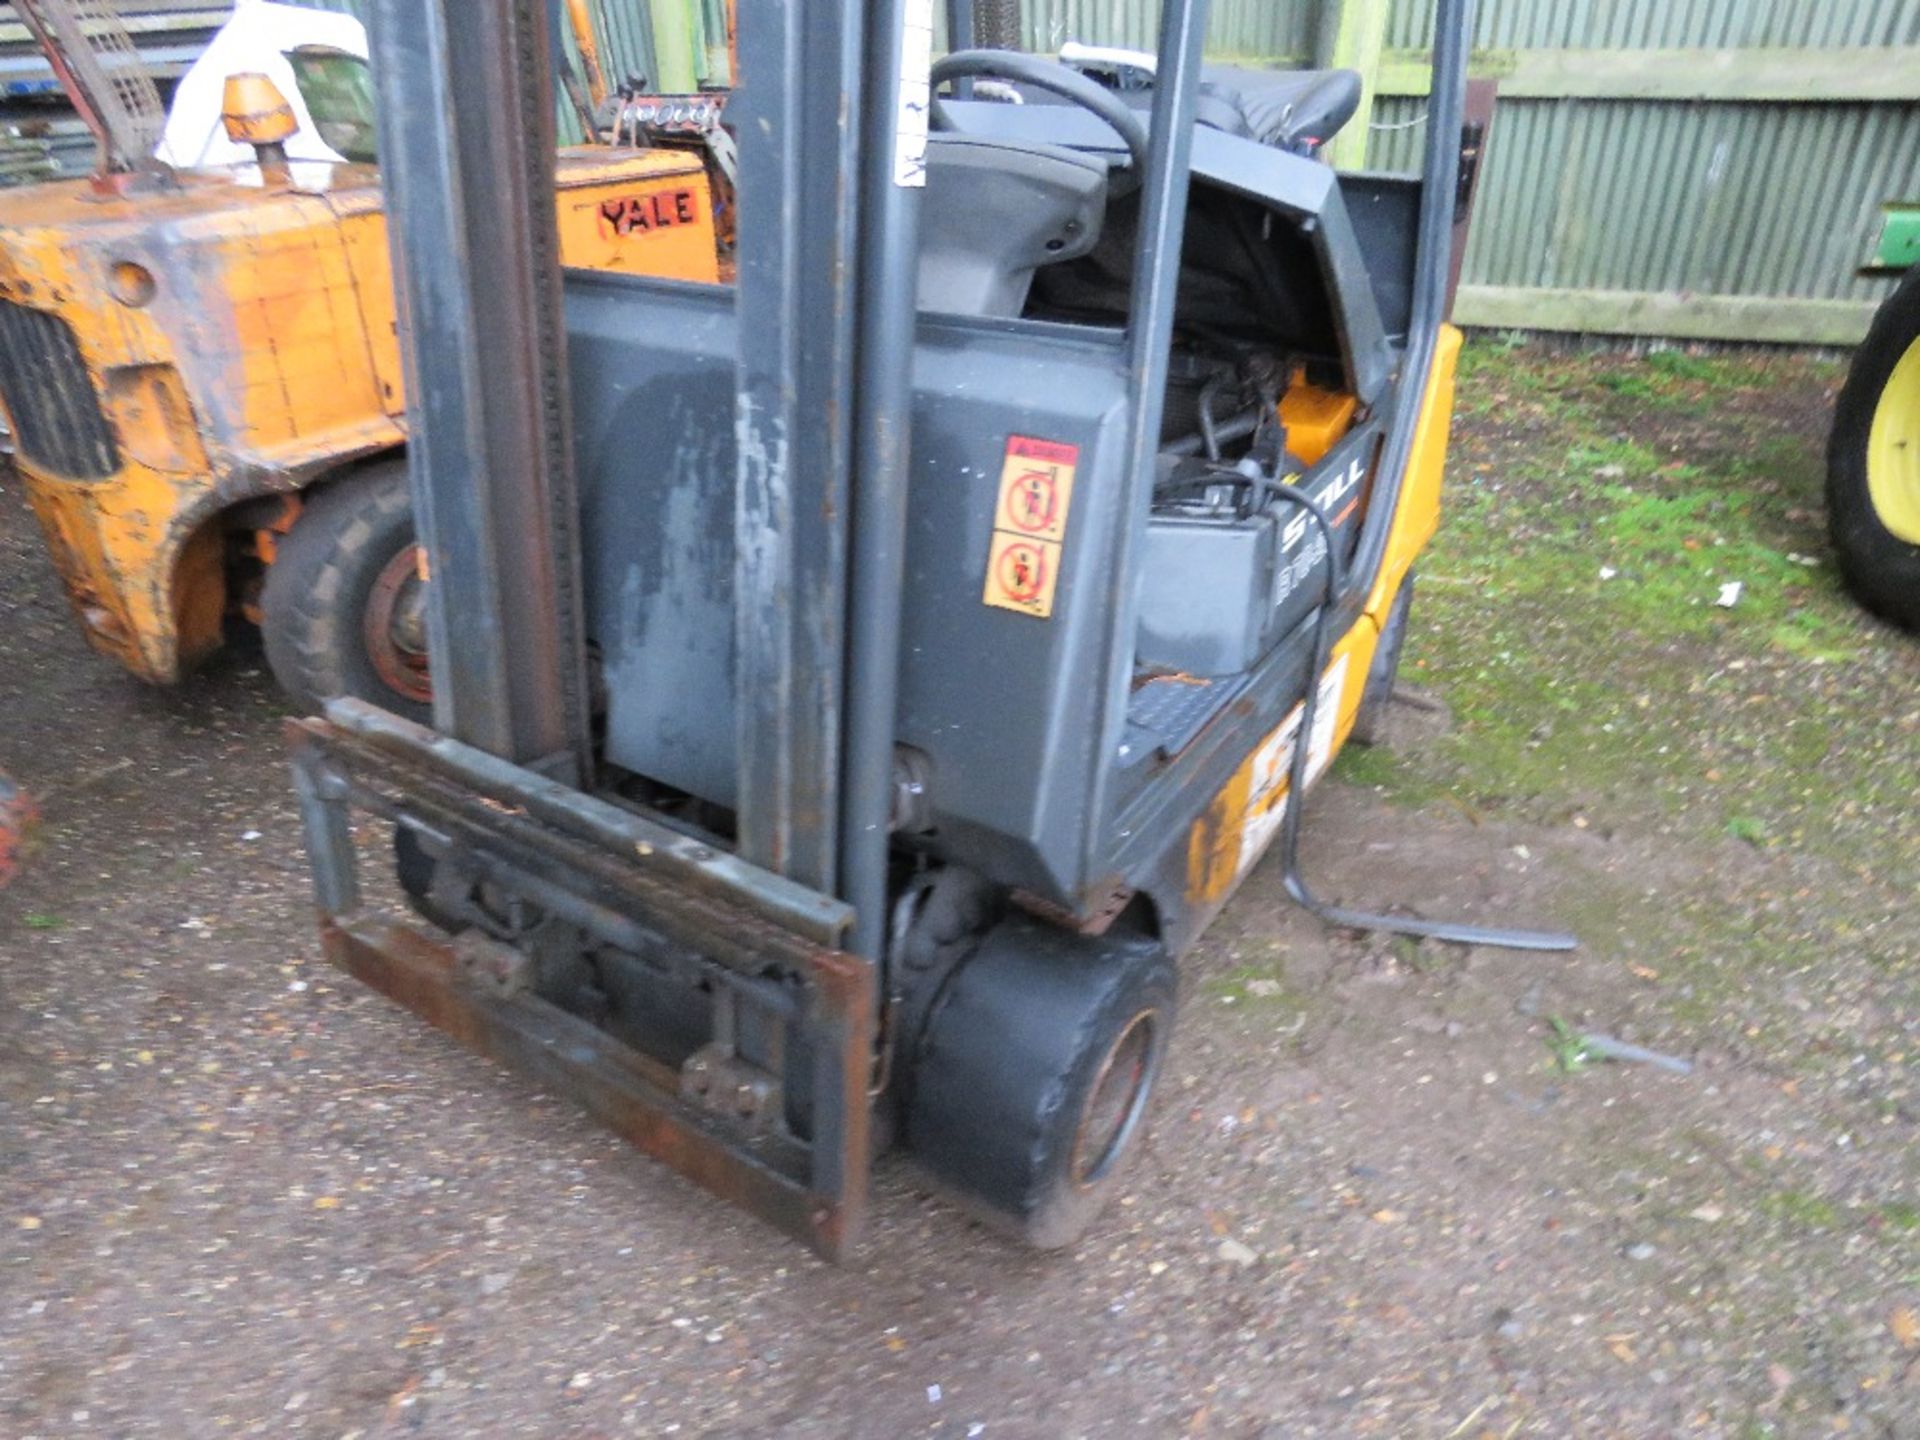 STILL R70-20 COMPACT DIESEL ENGINED FORKLIFT, SN:076001217. WEN TESTED WAS SEEN TO START, RUN AND LI - Image 2 of 3